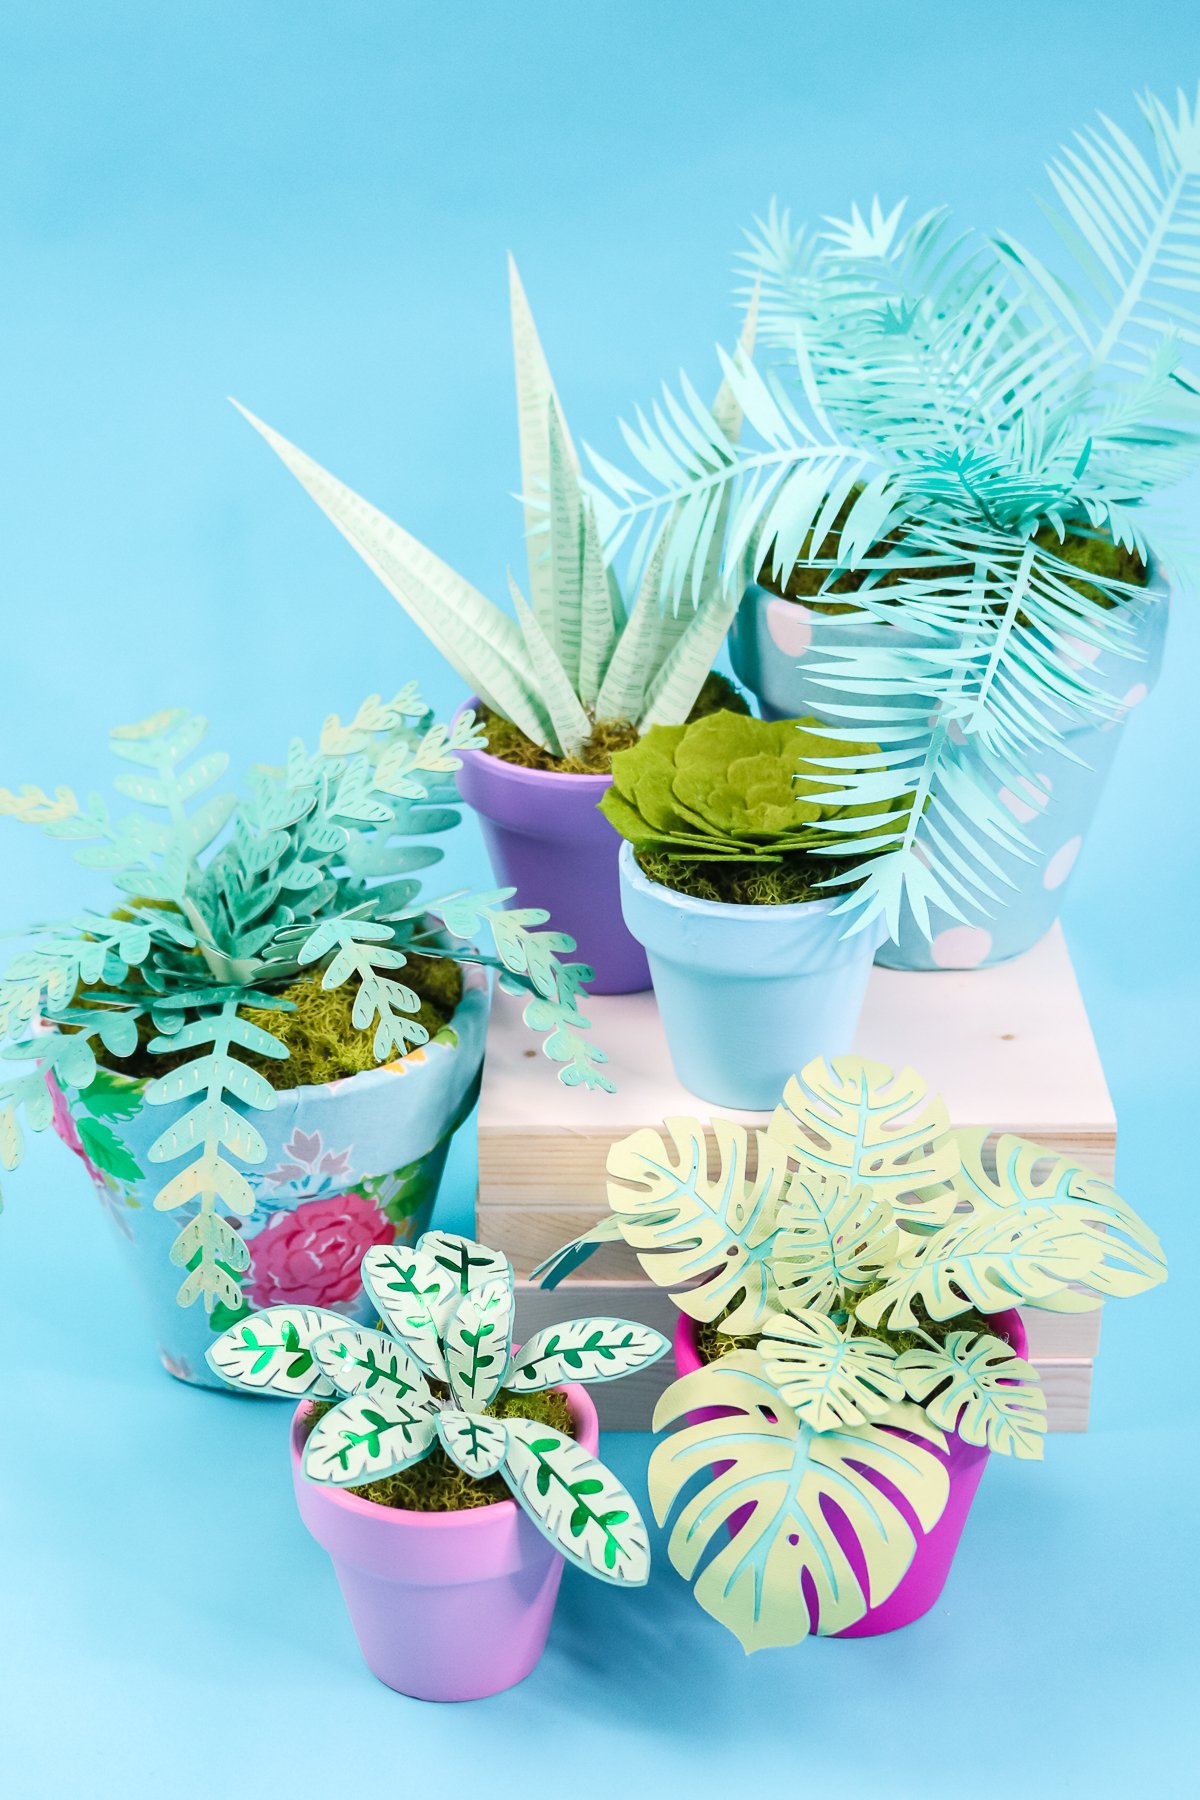 How to Make Paper Plants with a Cricut for a Garden Party - Angie Holden  The Country Chic Cottage